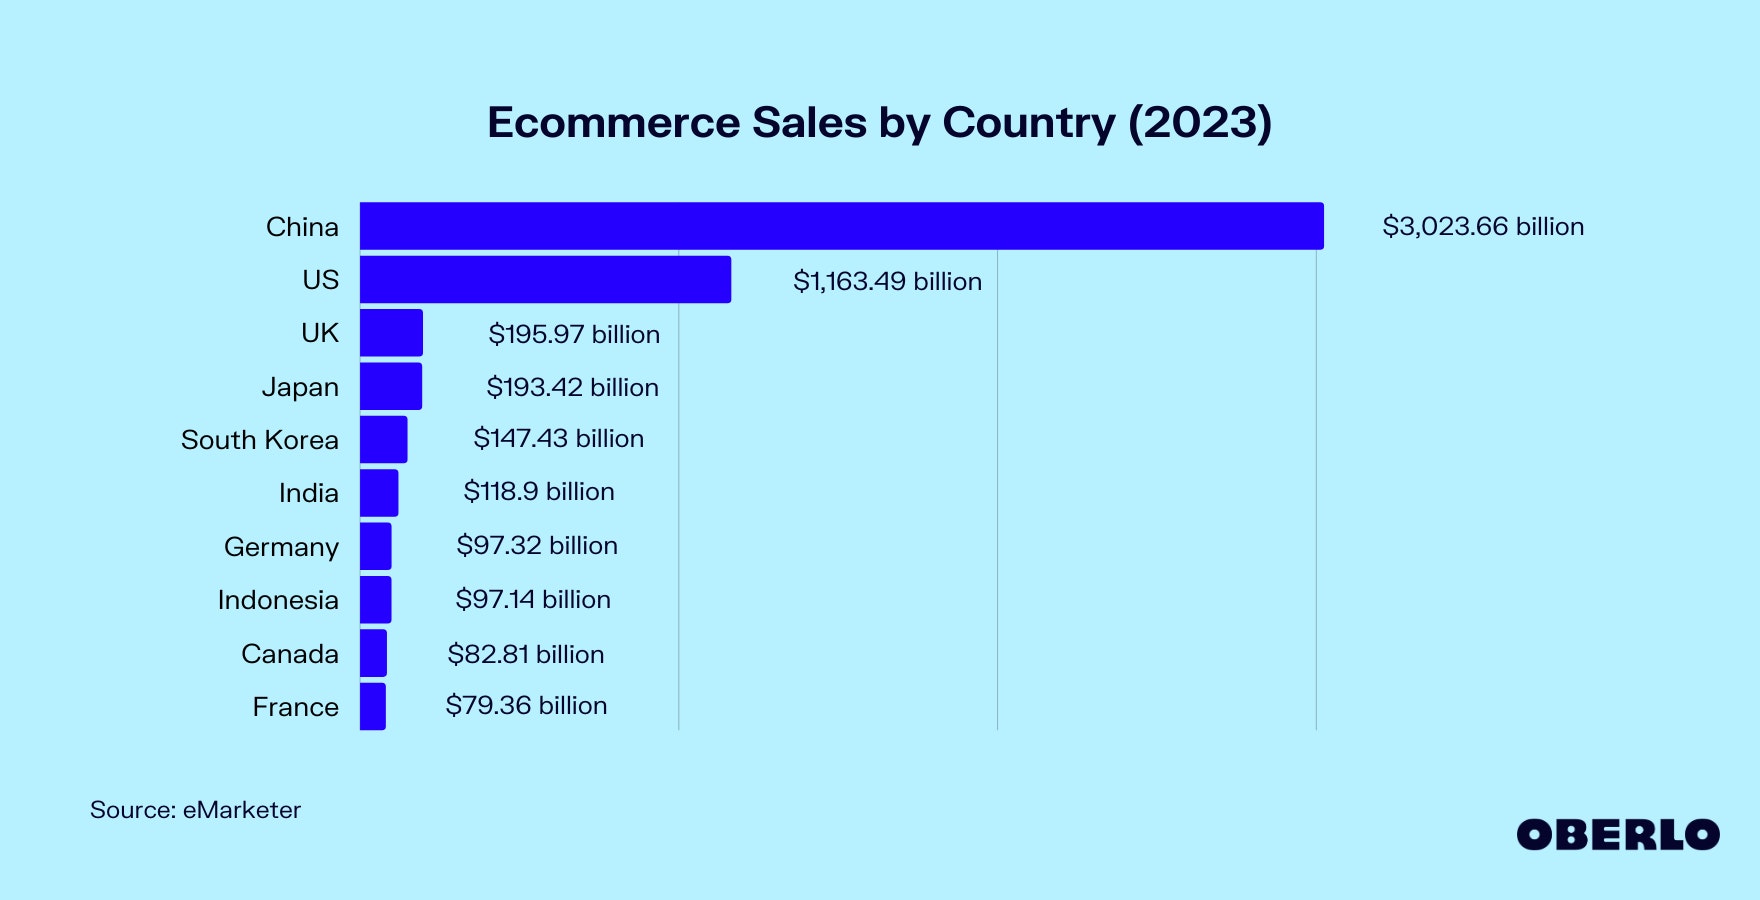 Chart showing: Ecommerce Sales by Country in 2022